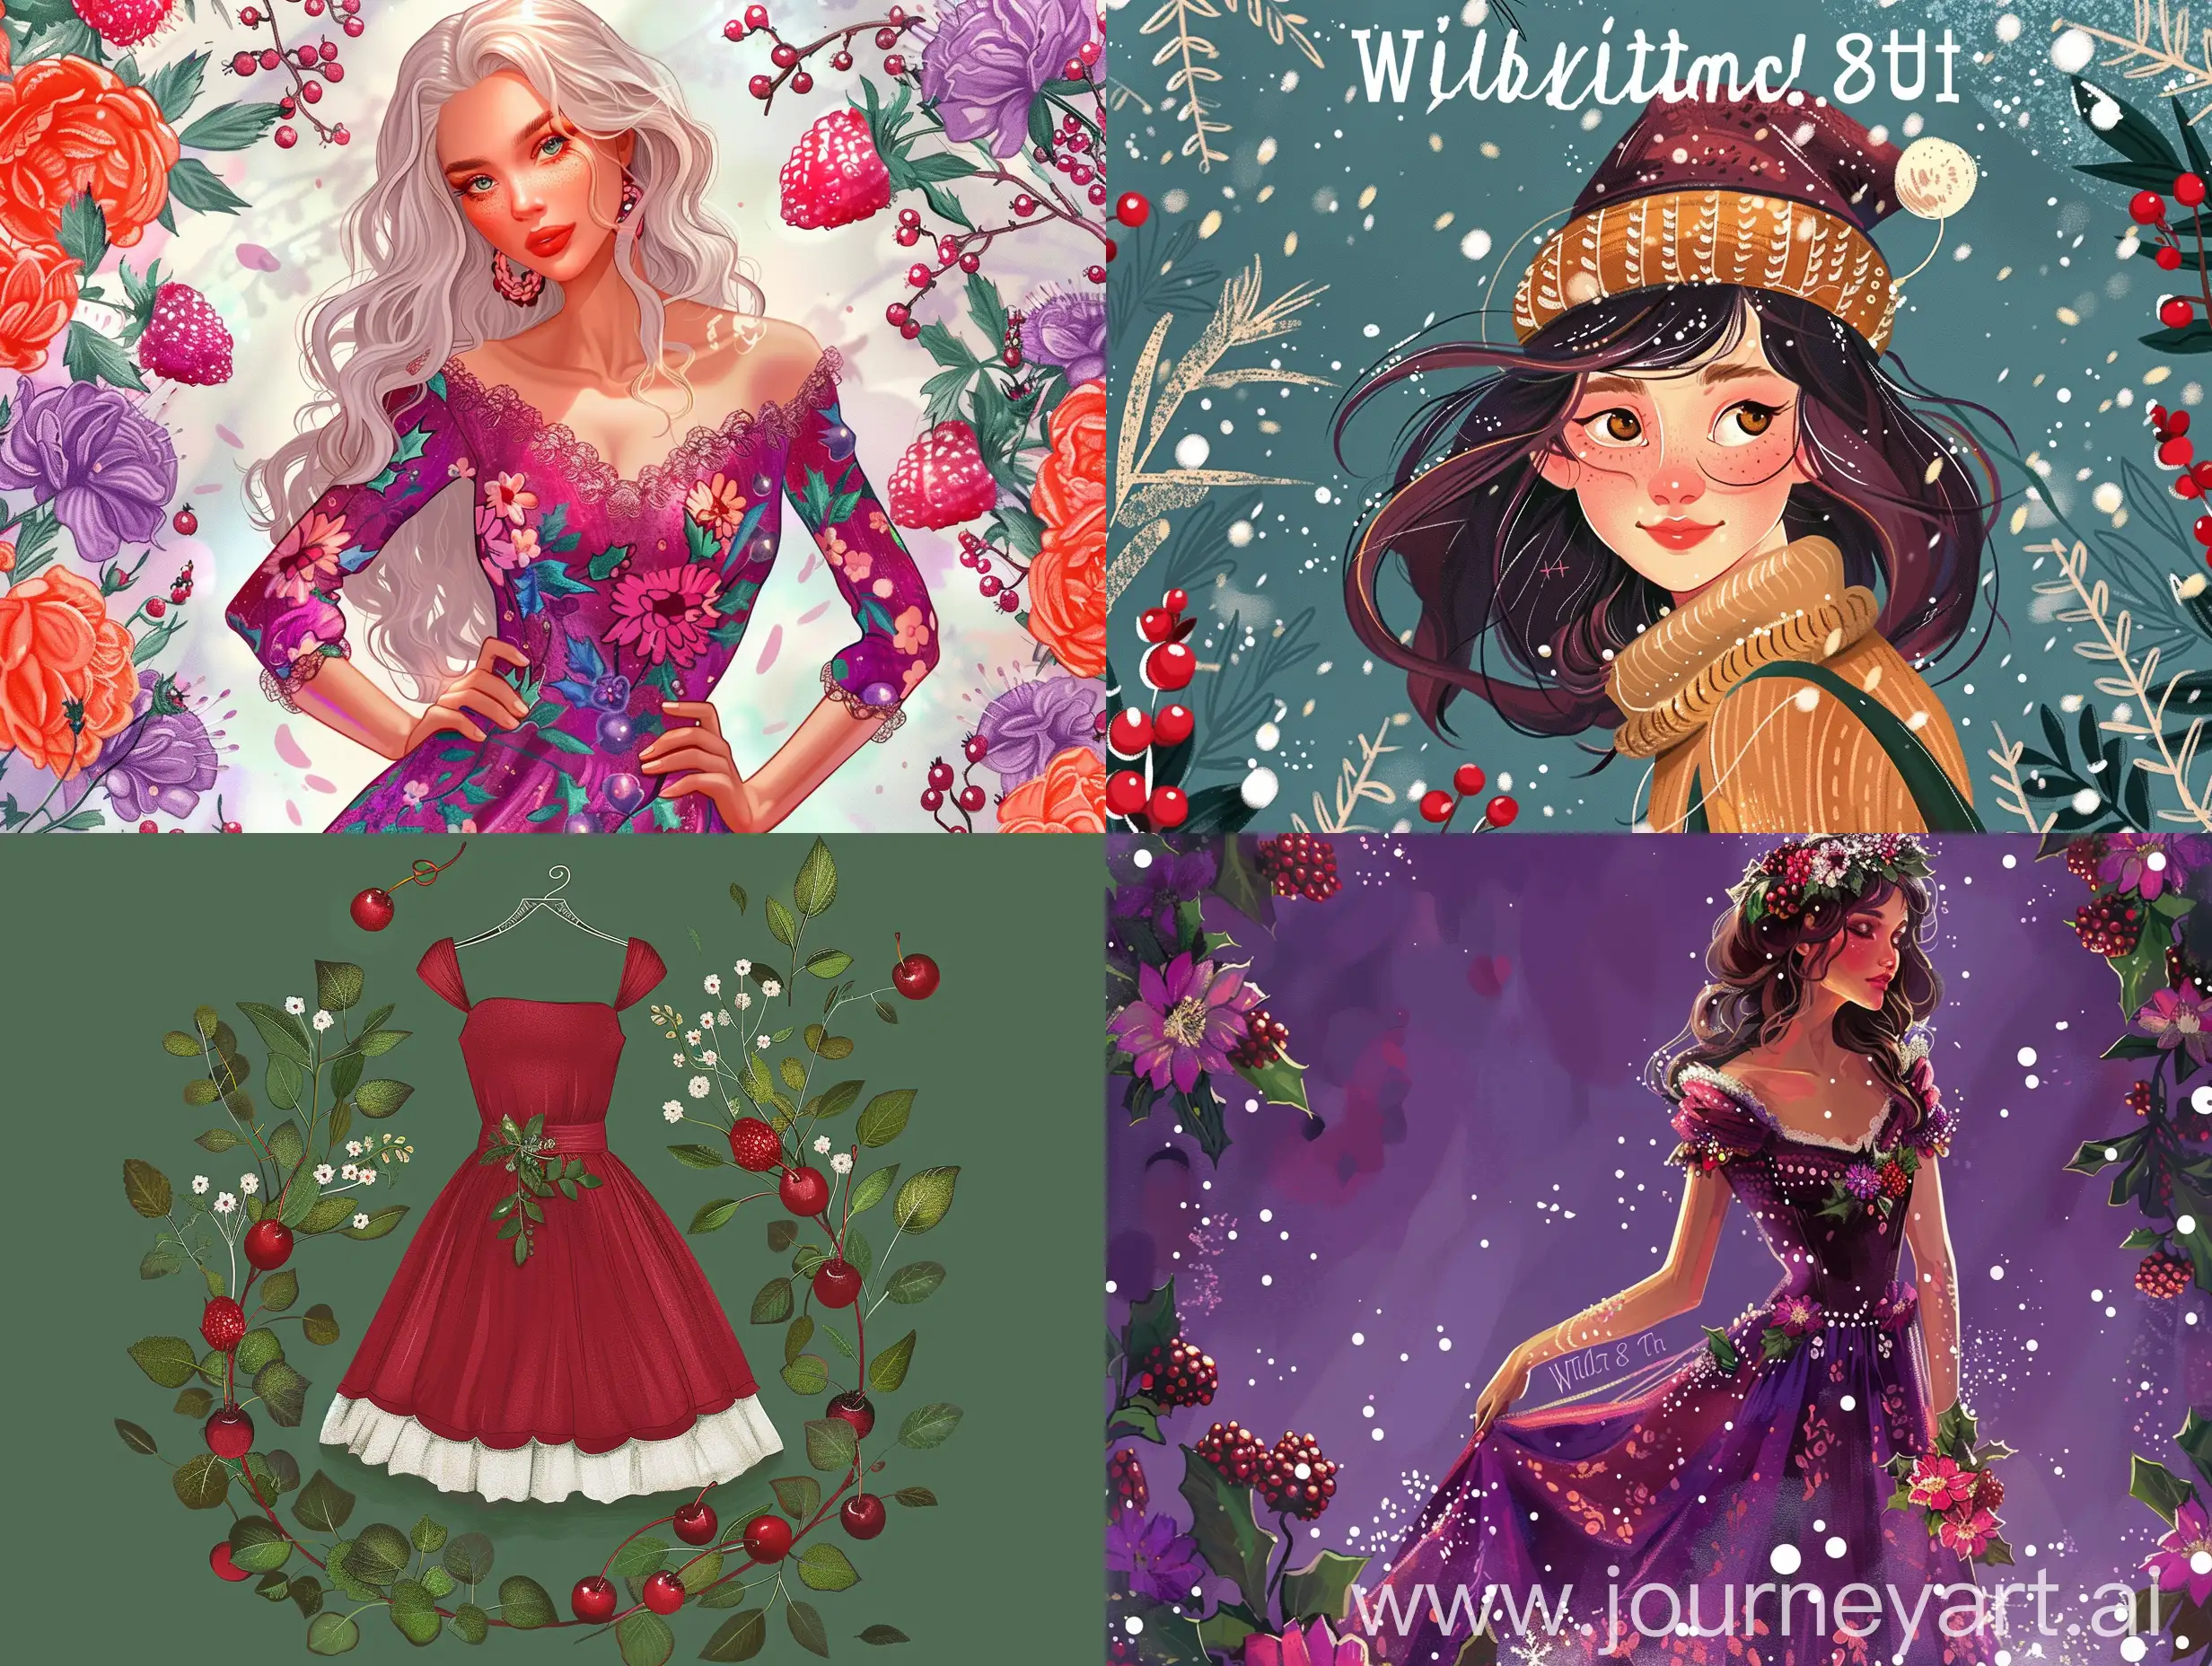 Festive-March-8th-Dress-Design-for-Wildberries-Elegance-and-Celebration-in-a-Vibrant-Cover